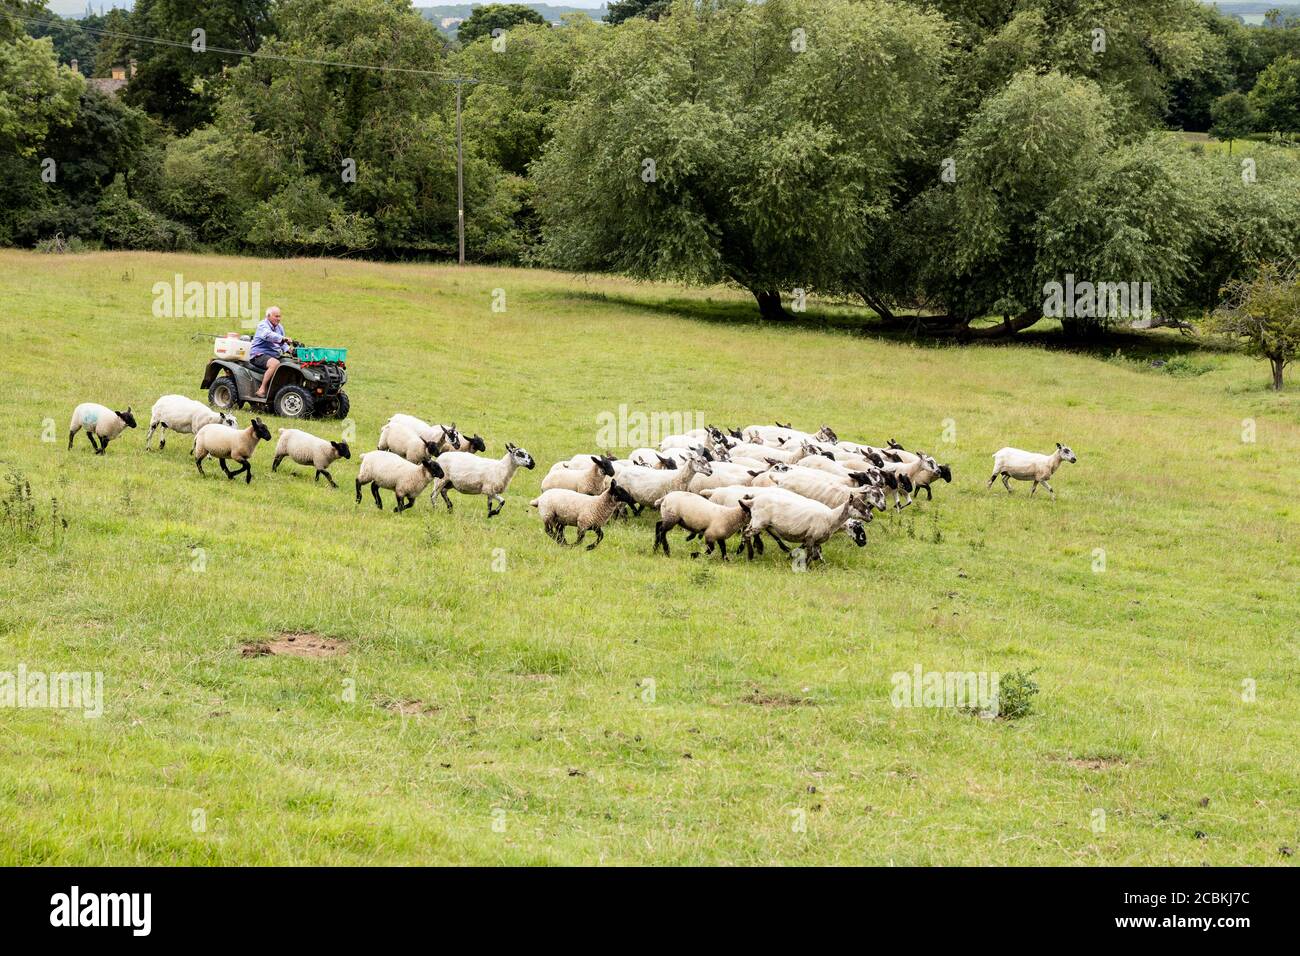 A farmer using a quad bike to round up his sheep at the Cotswold village of Stanton, Gloucestershire UK Stock Photo